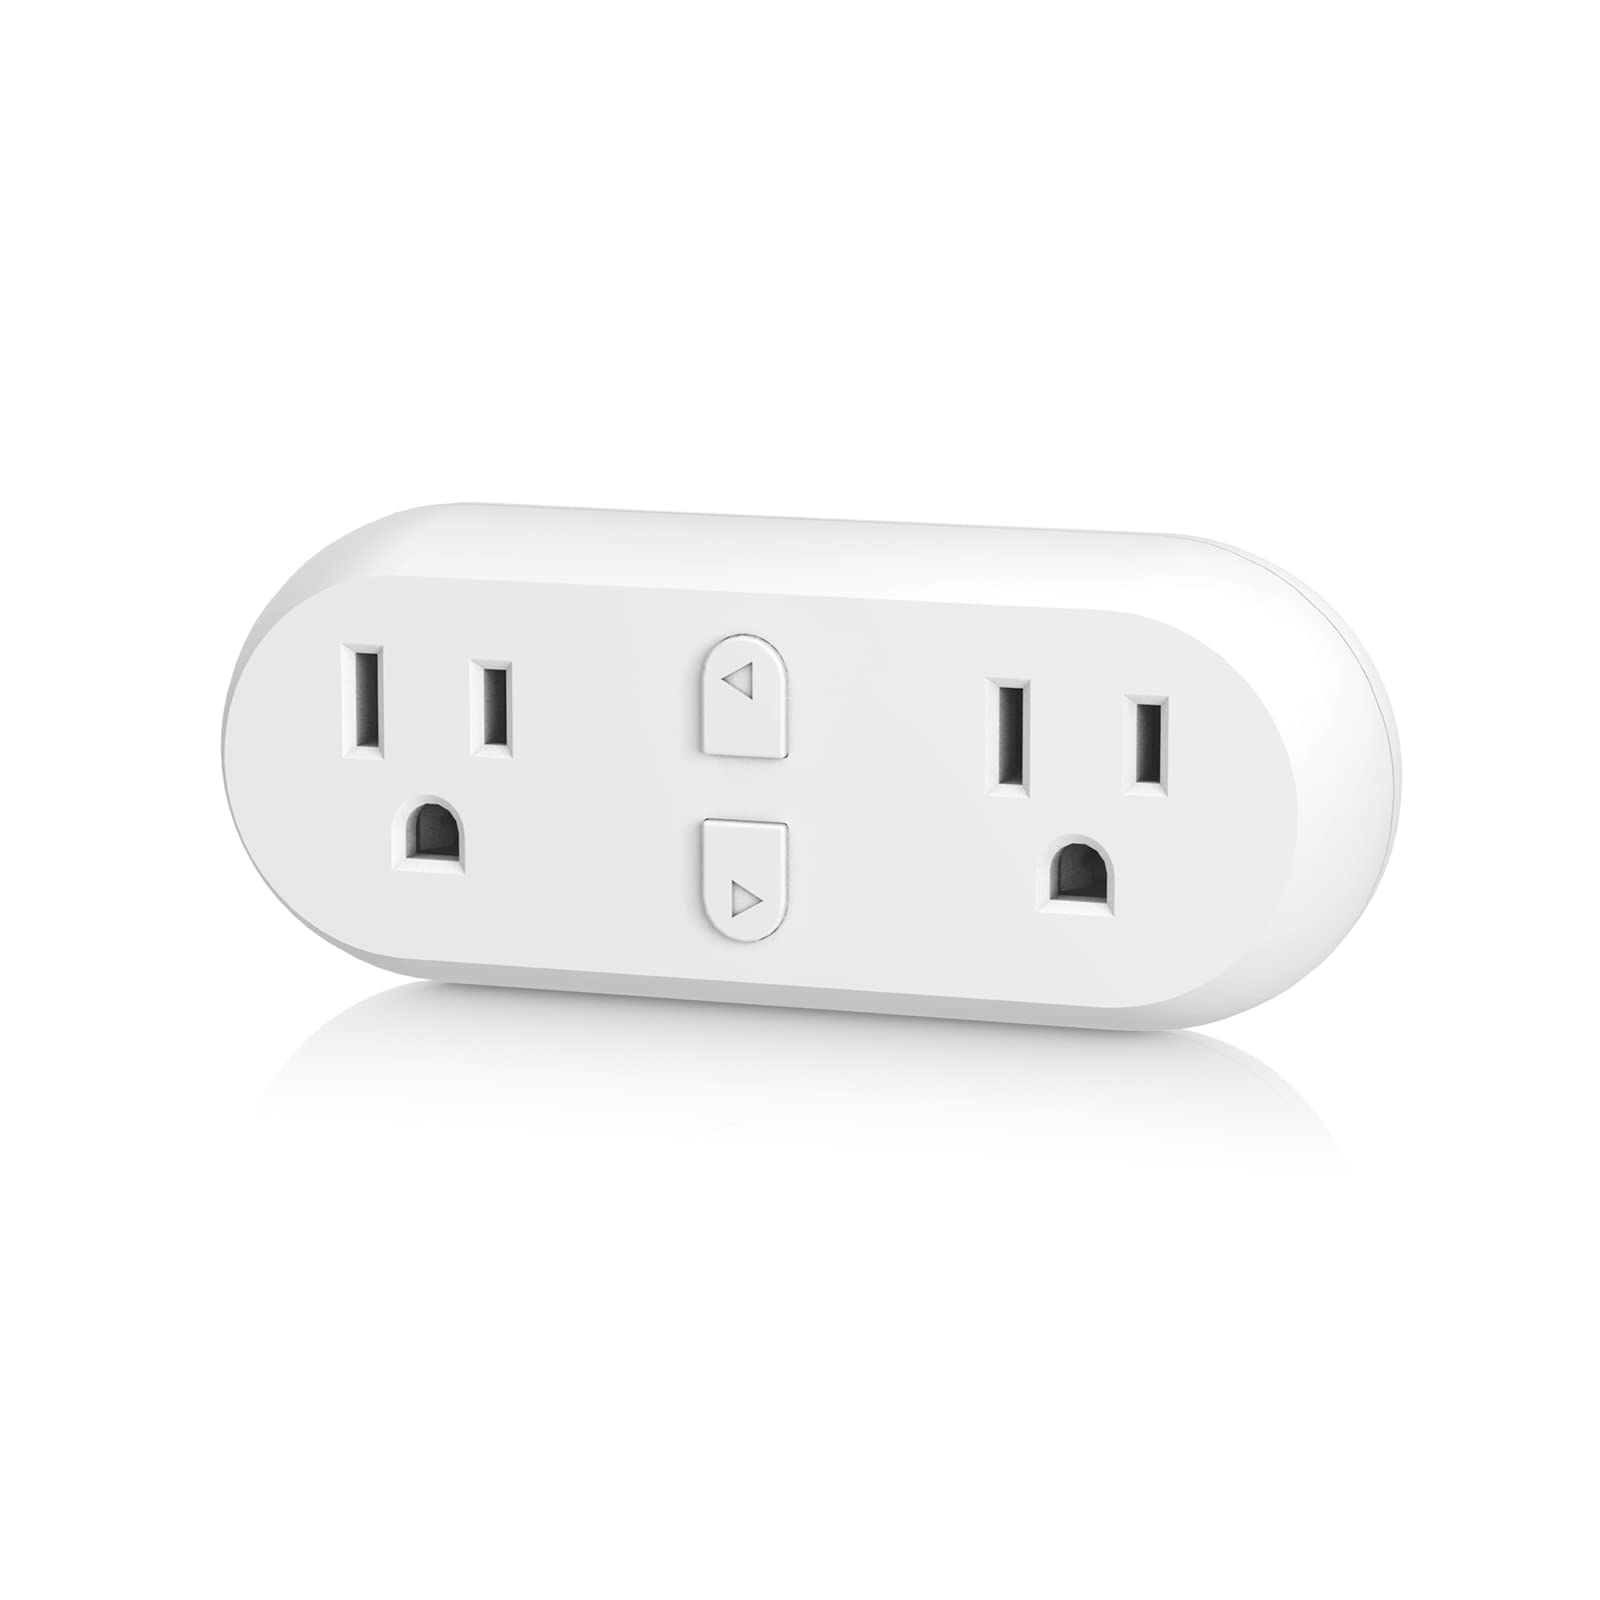 HBN Smart Plug 15A, WiFi Outlet Extender Dual Socket Plugs Works with Alexa, Google Home Assistant, Remote Control with Timer Function, No Hub